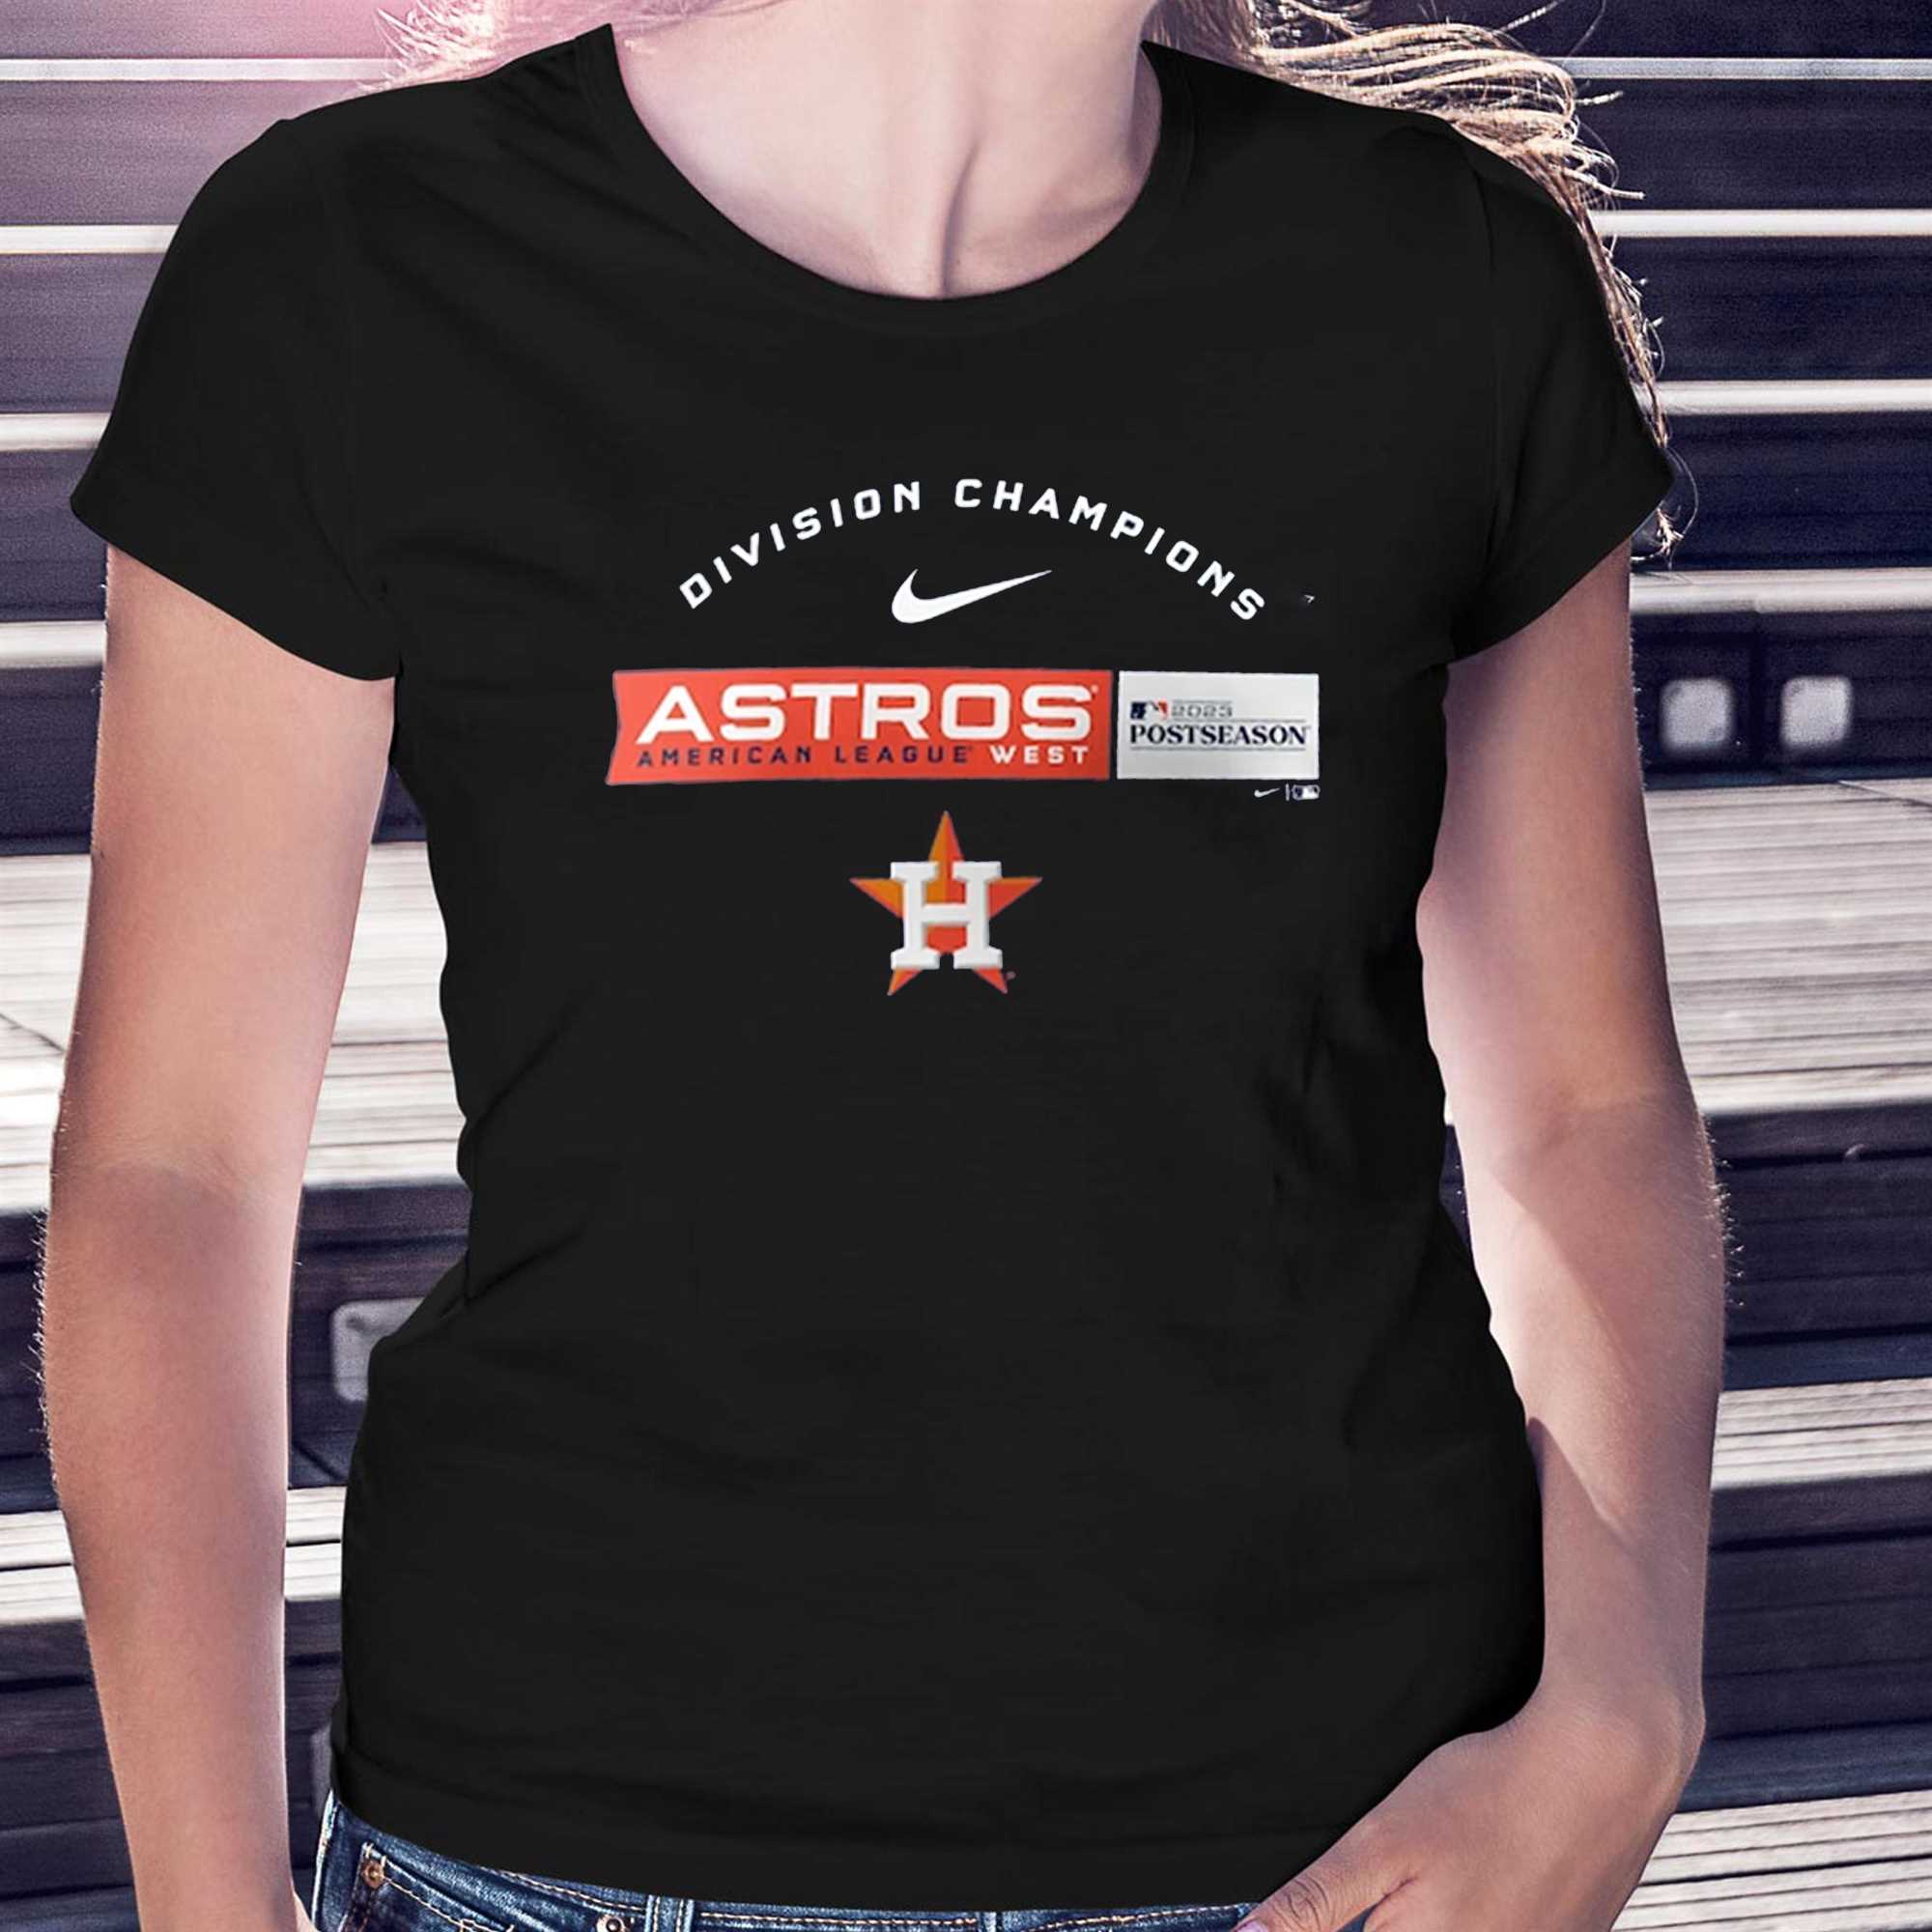 astros division champs shirts